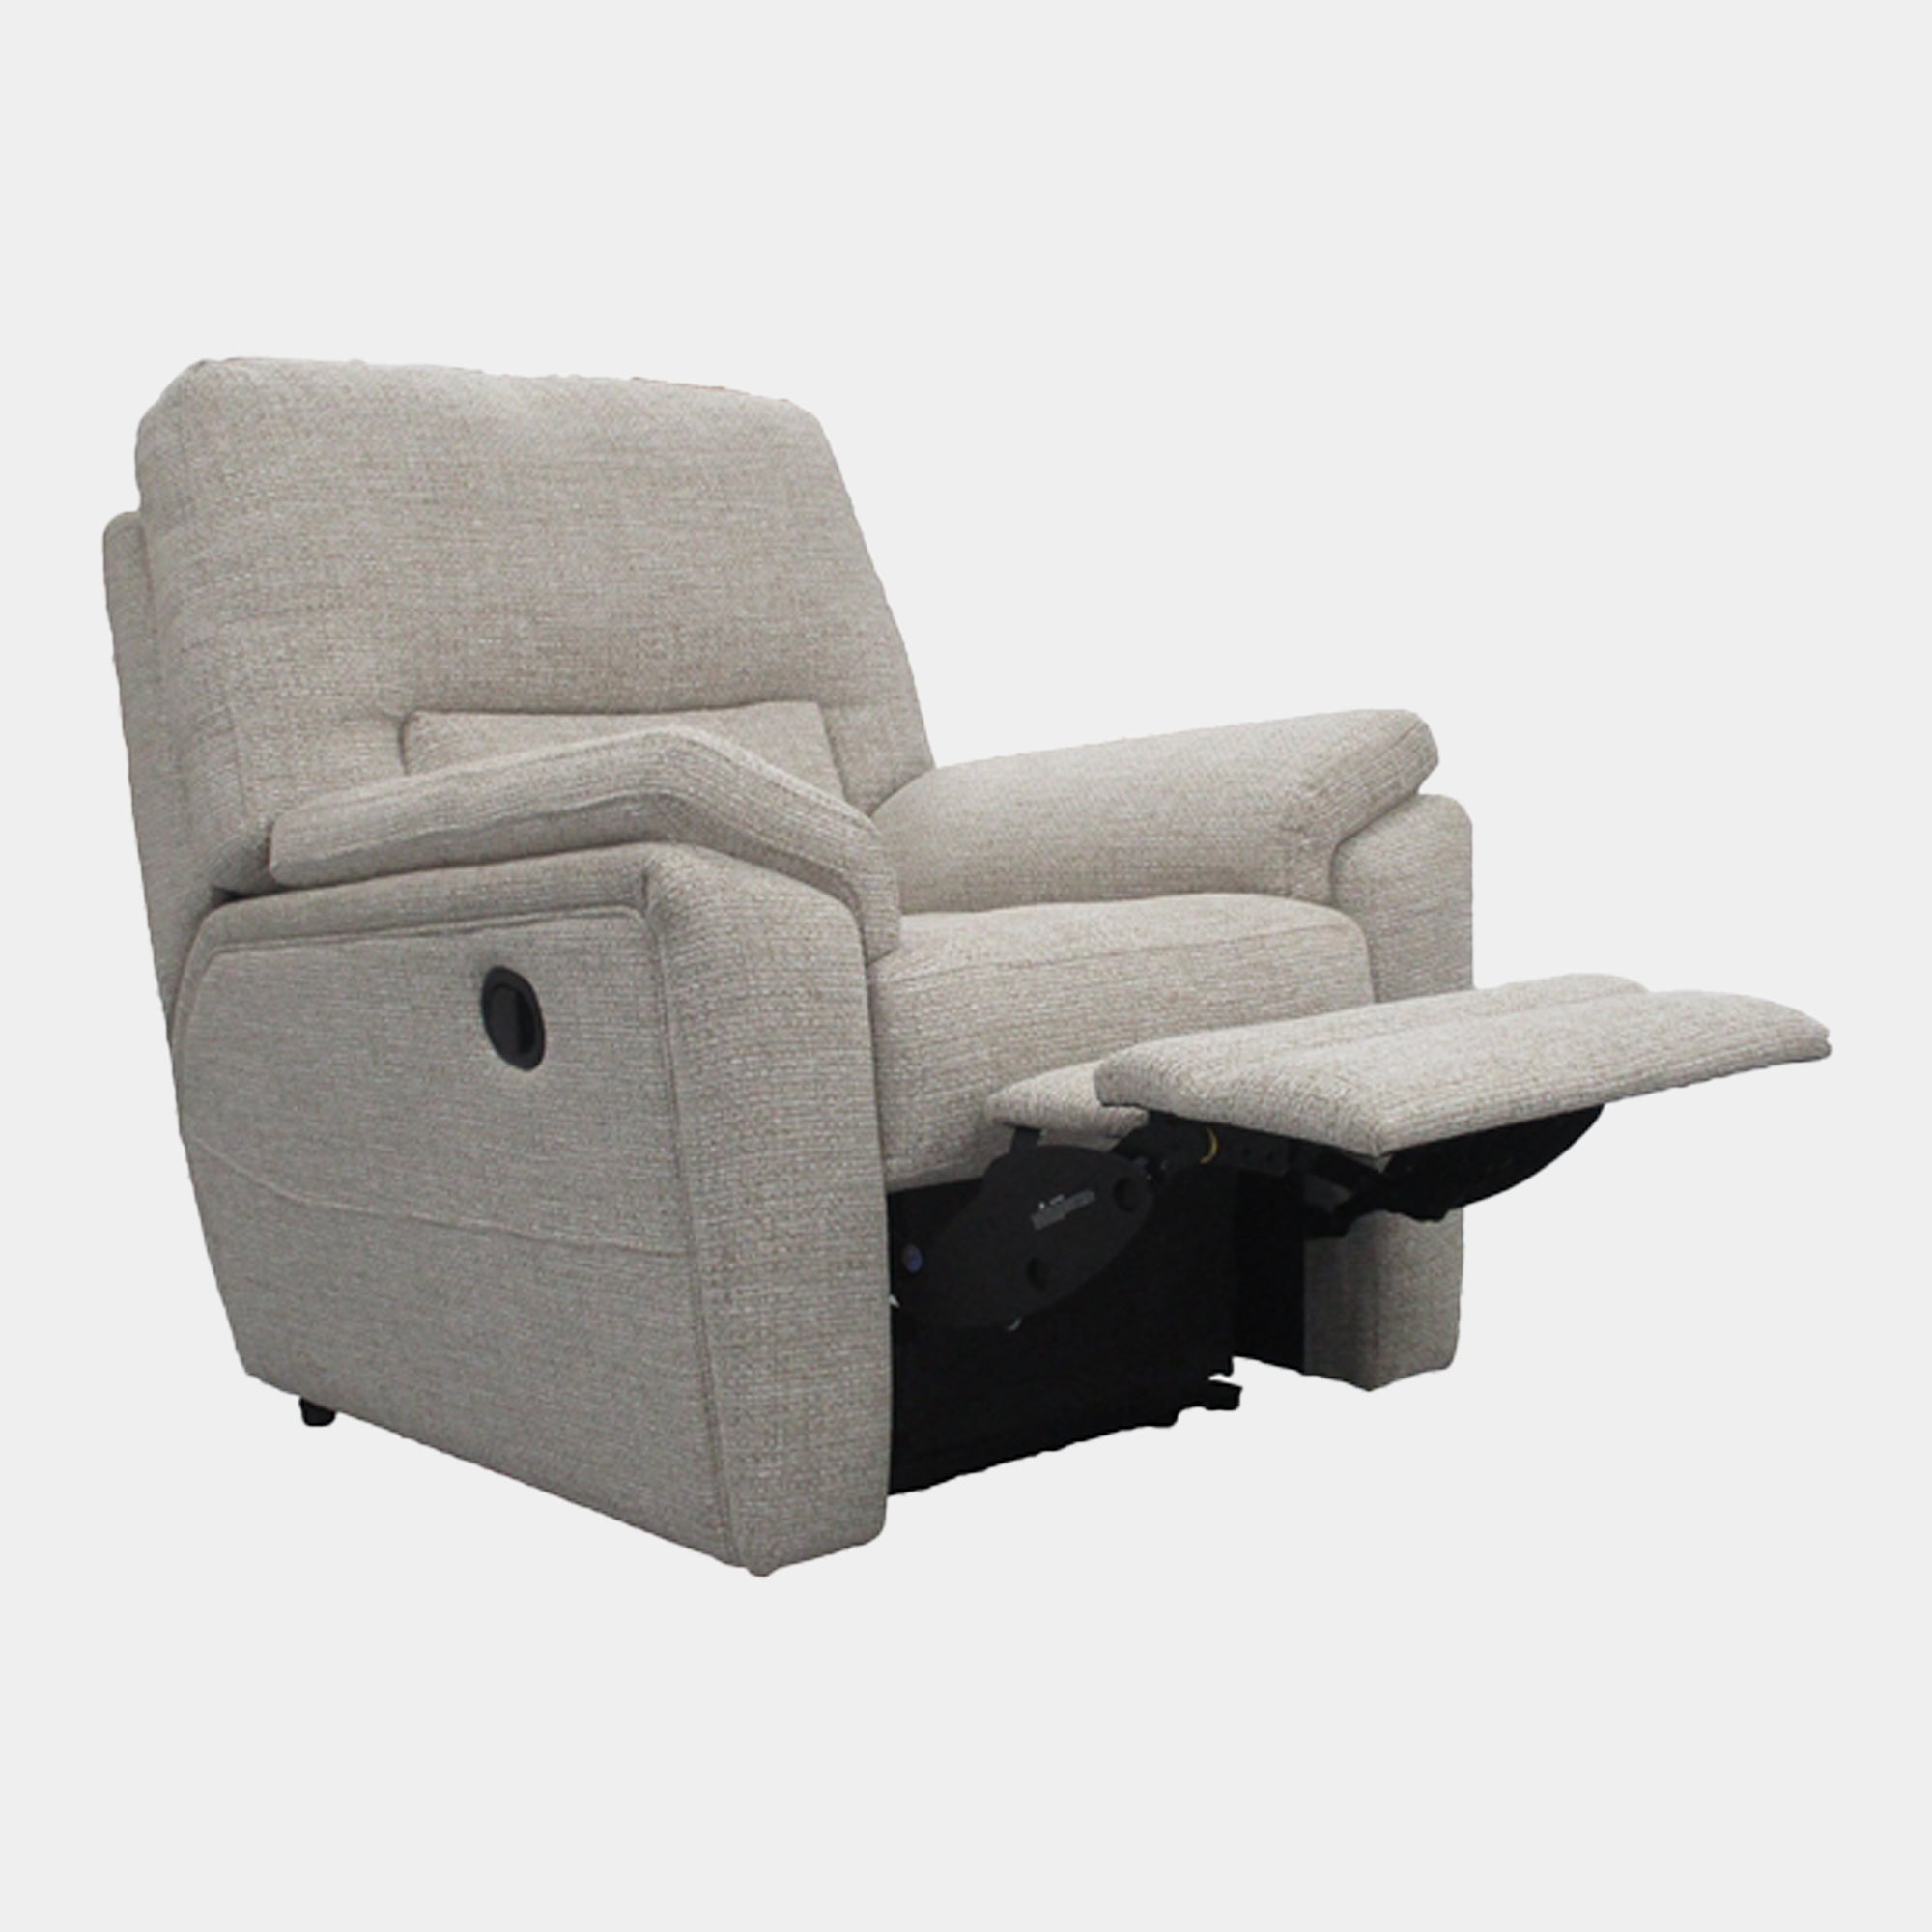 Armchair Power Recliner With 2 Button Switch - Single Motor In Grade A Fabric